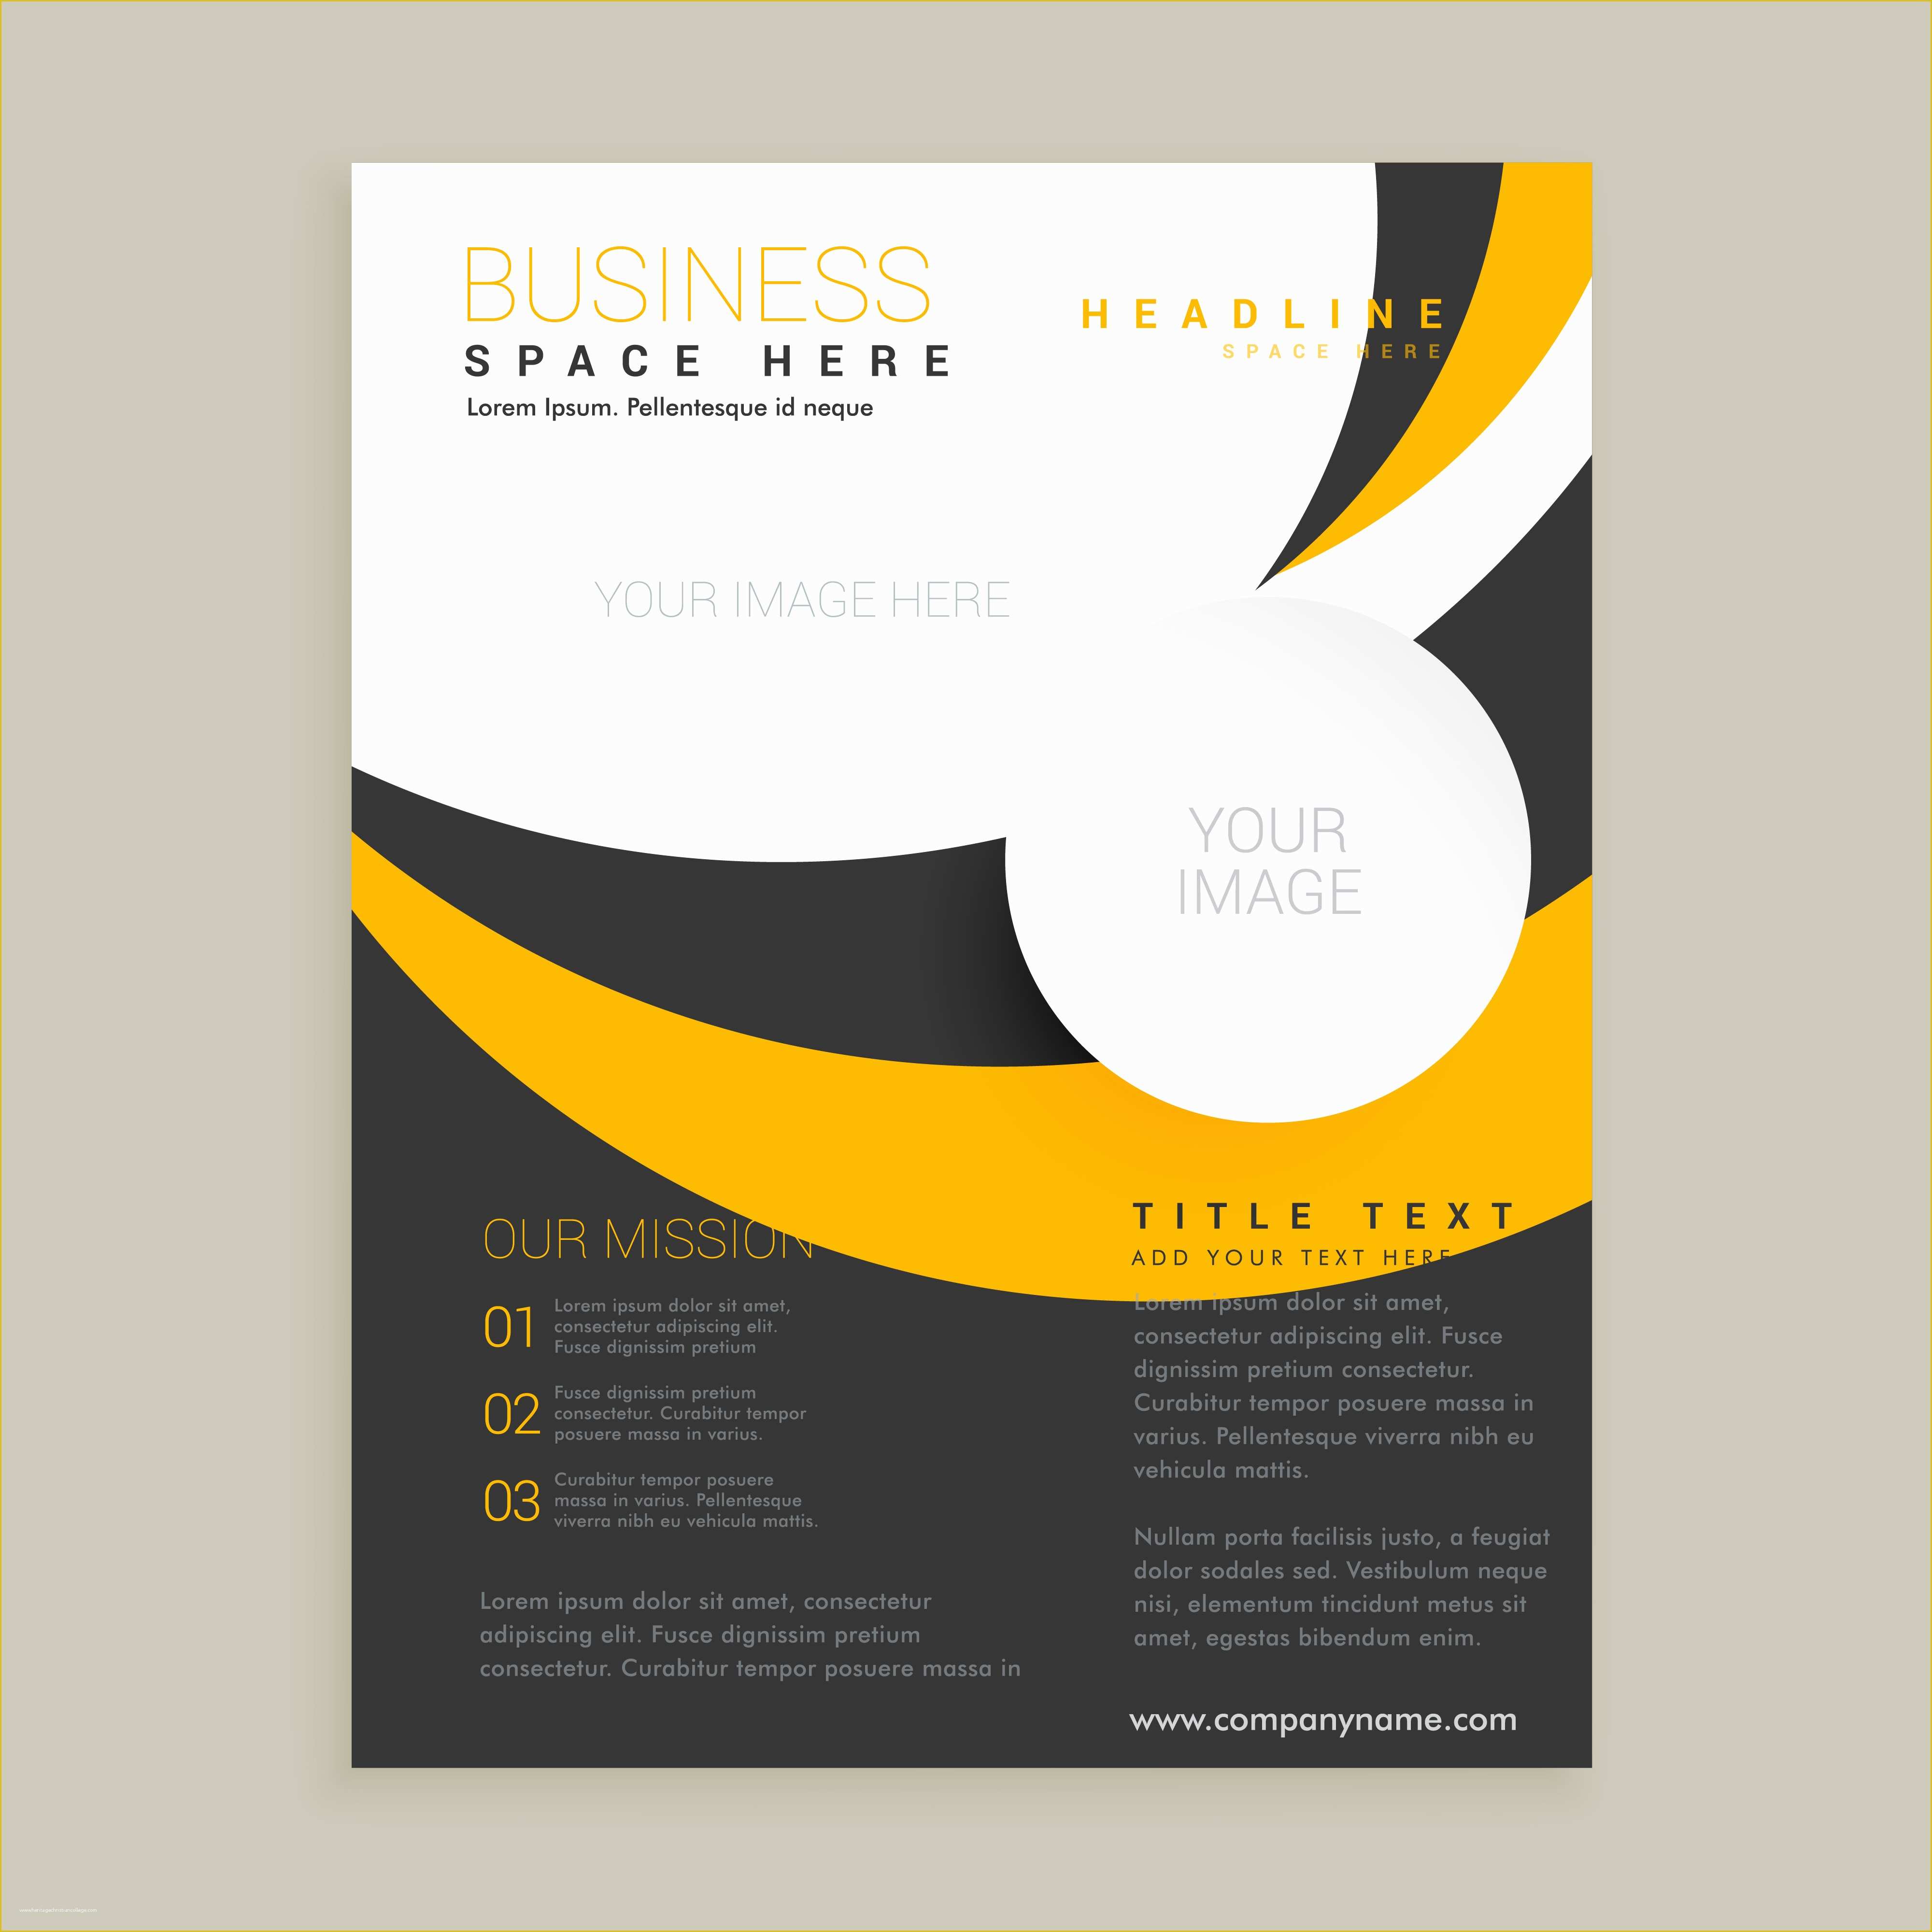 Free Simple Brochure Templates Of Awesome Yellow and Black Business Brochure Design Vector